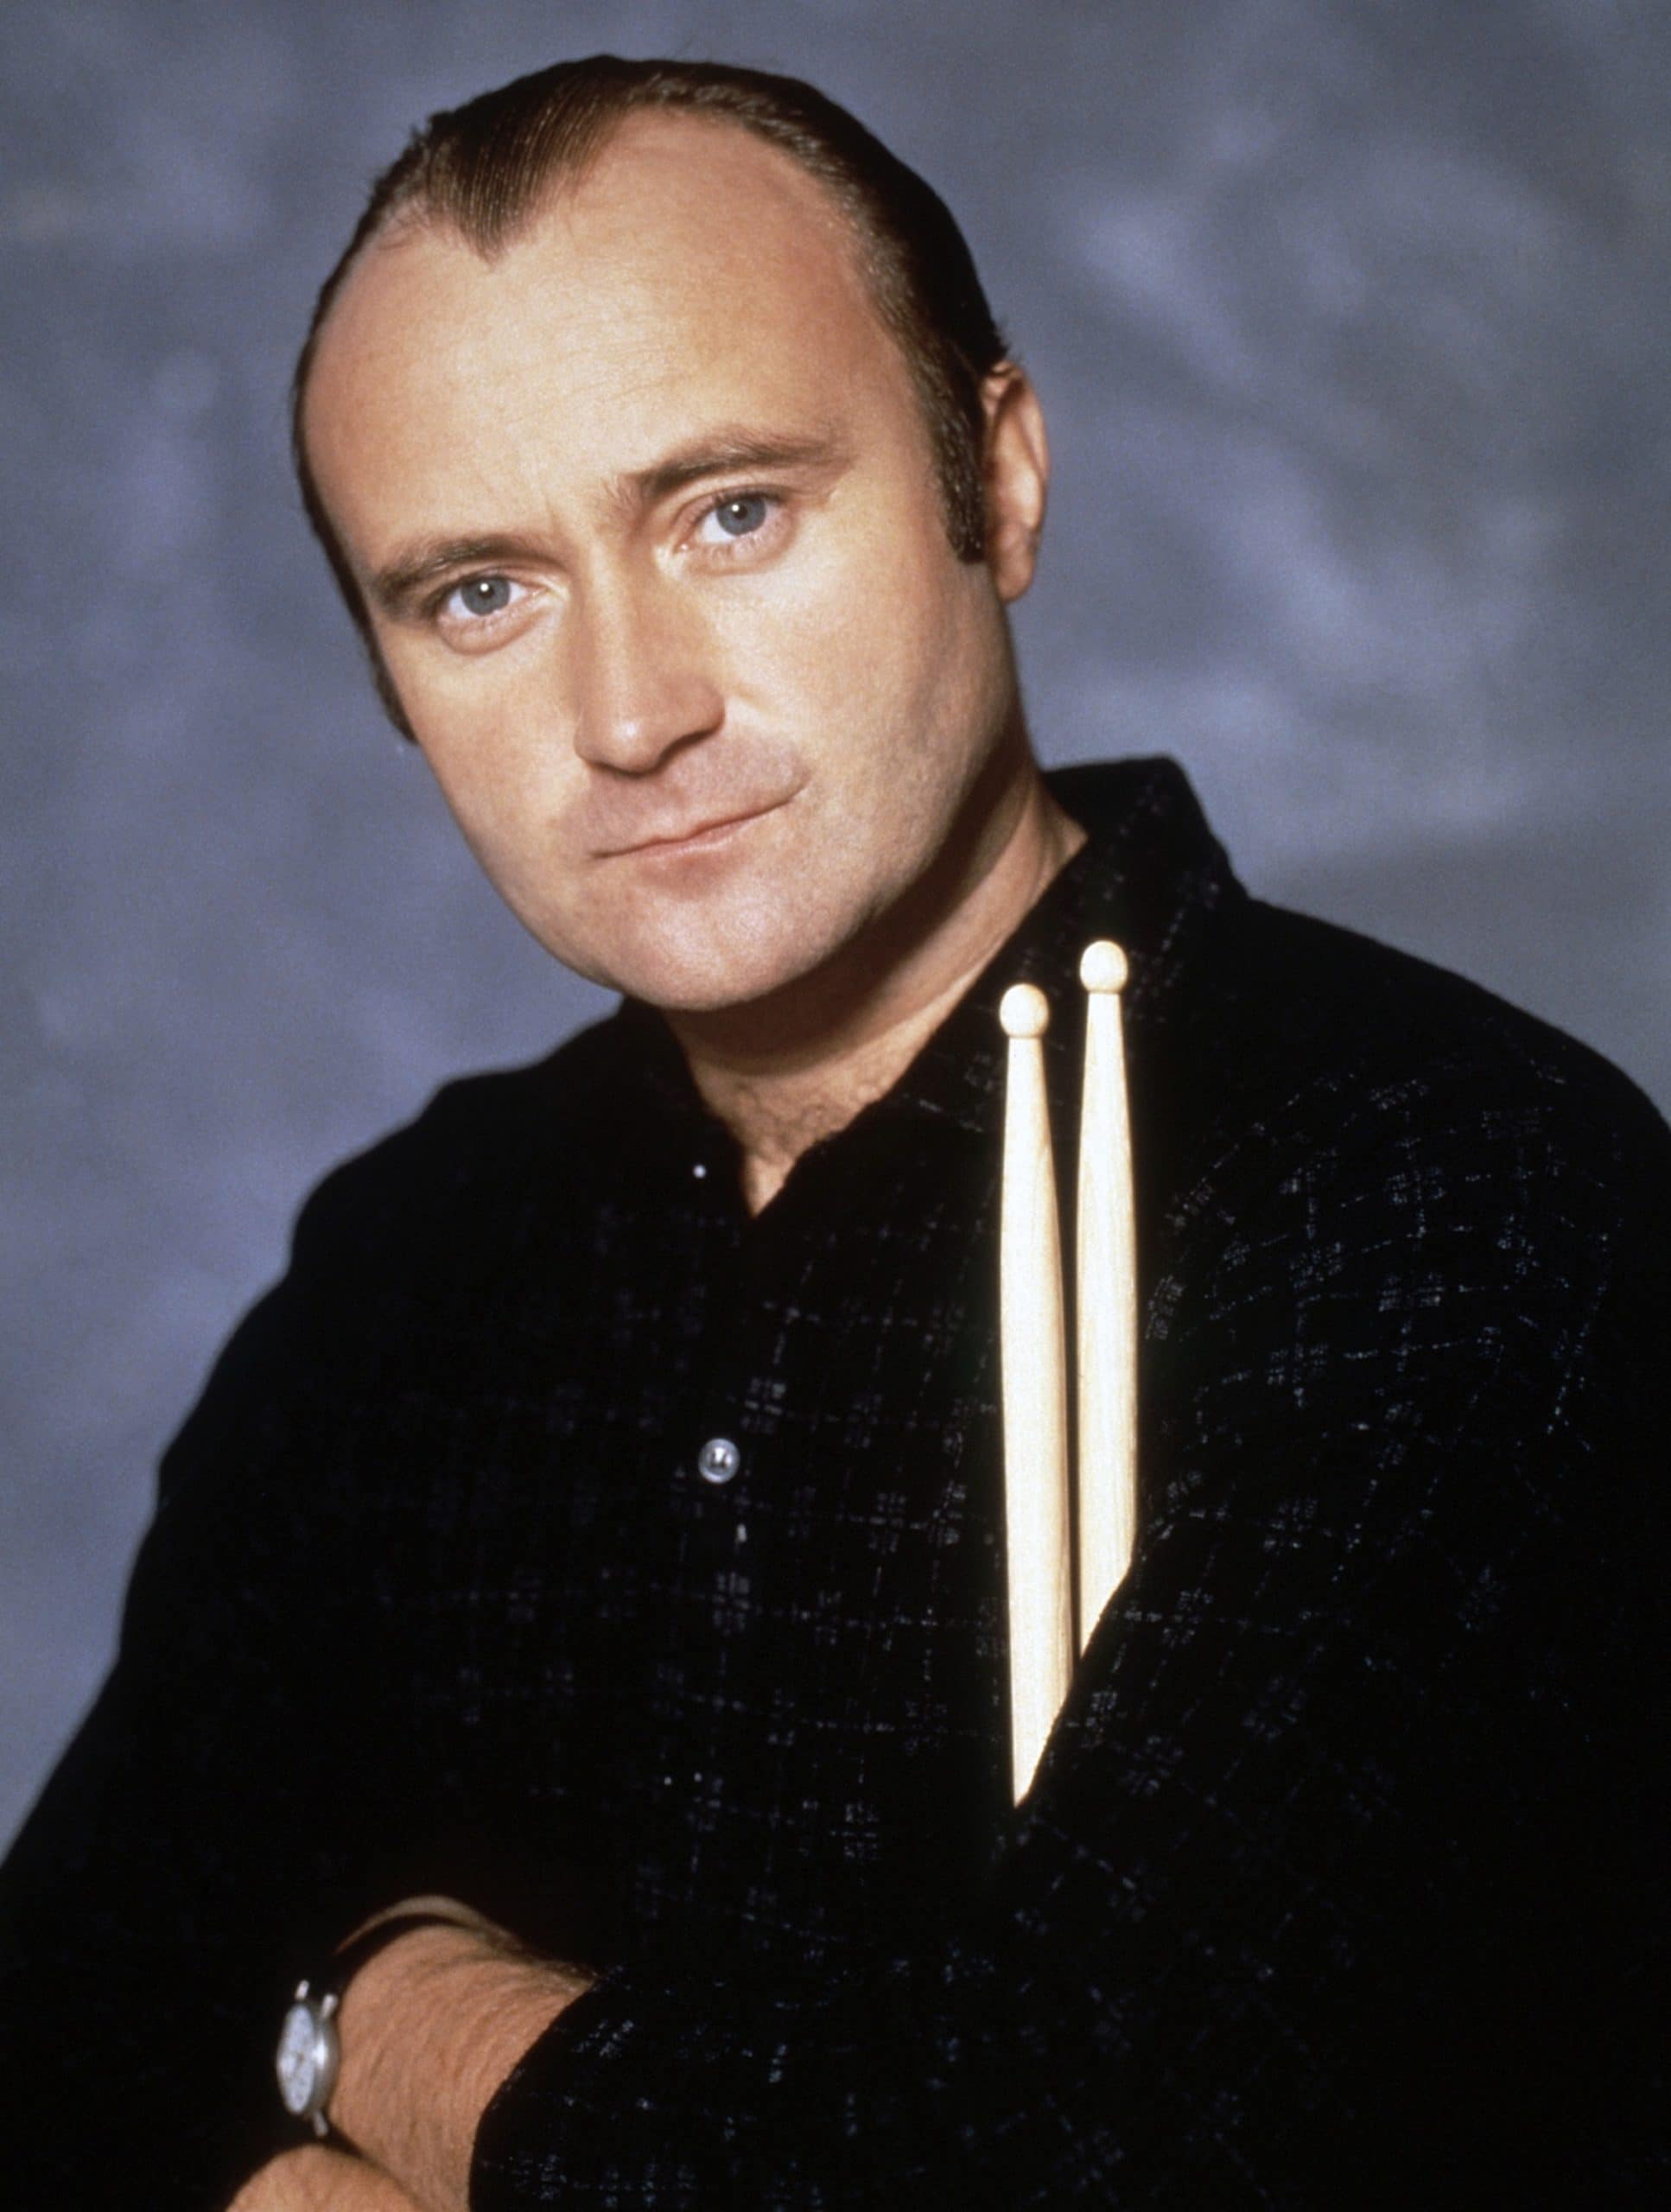 THE 1993 BILLBOARD MUSIC AWARDS, Phil Collins, host